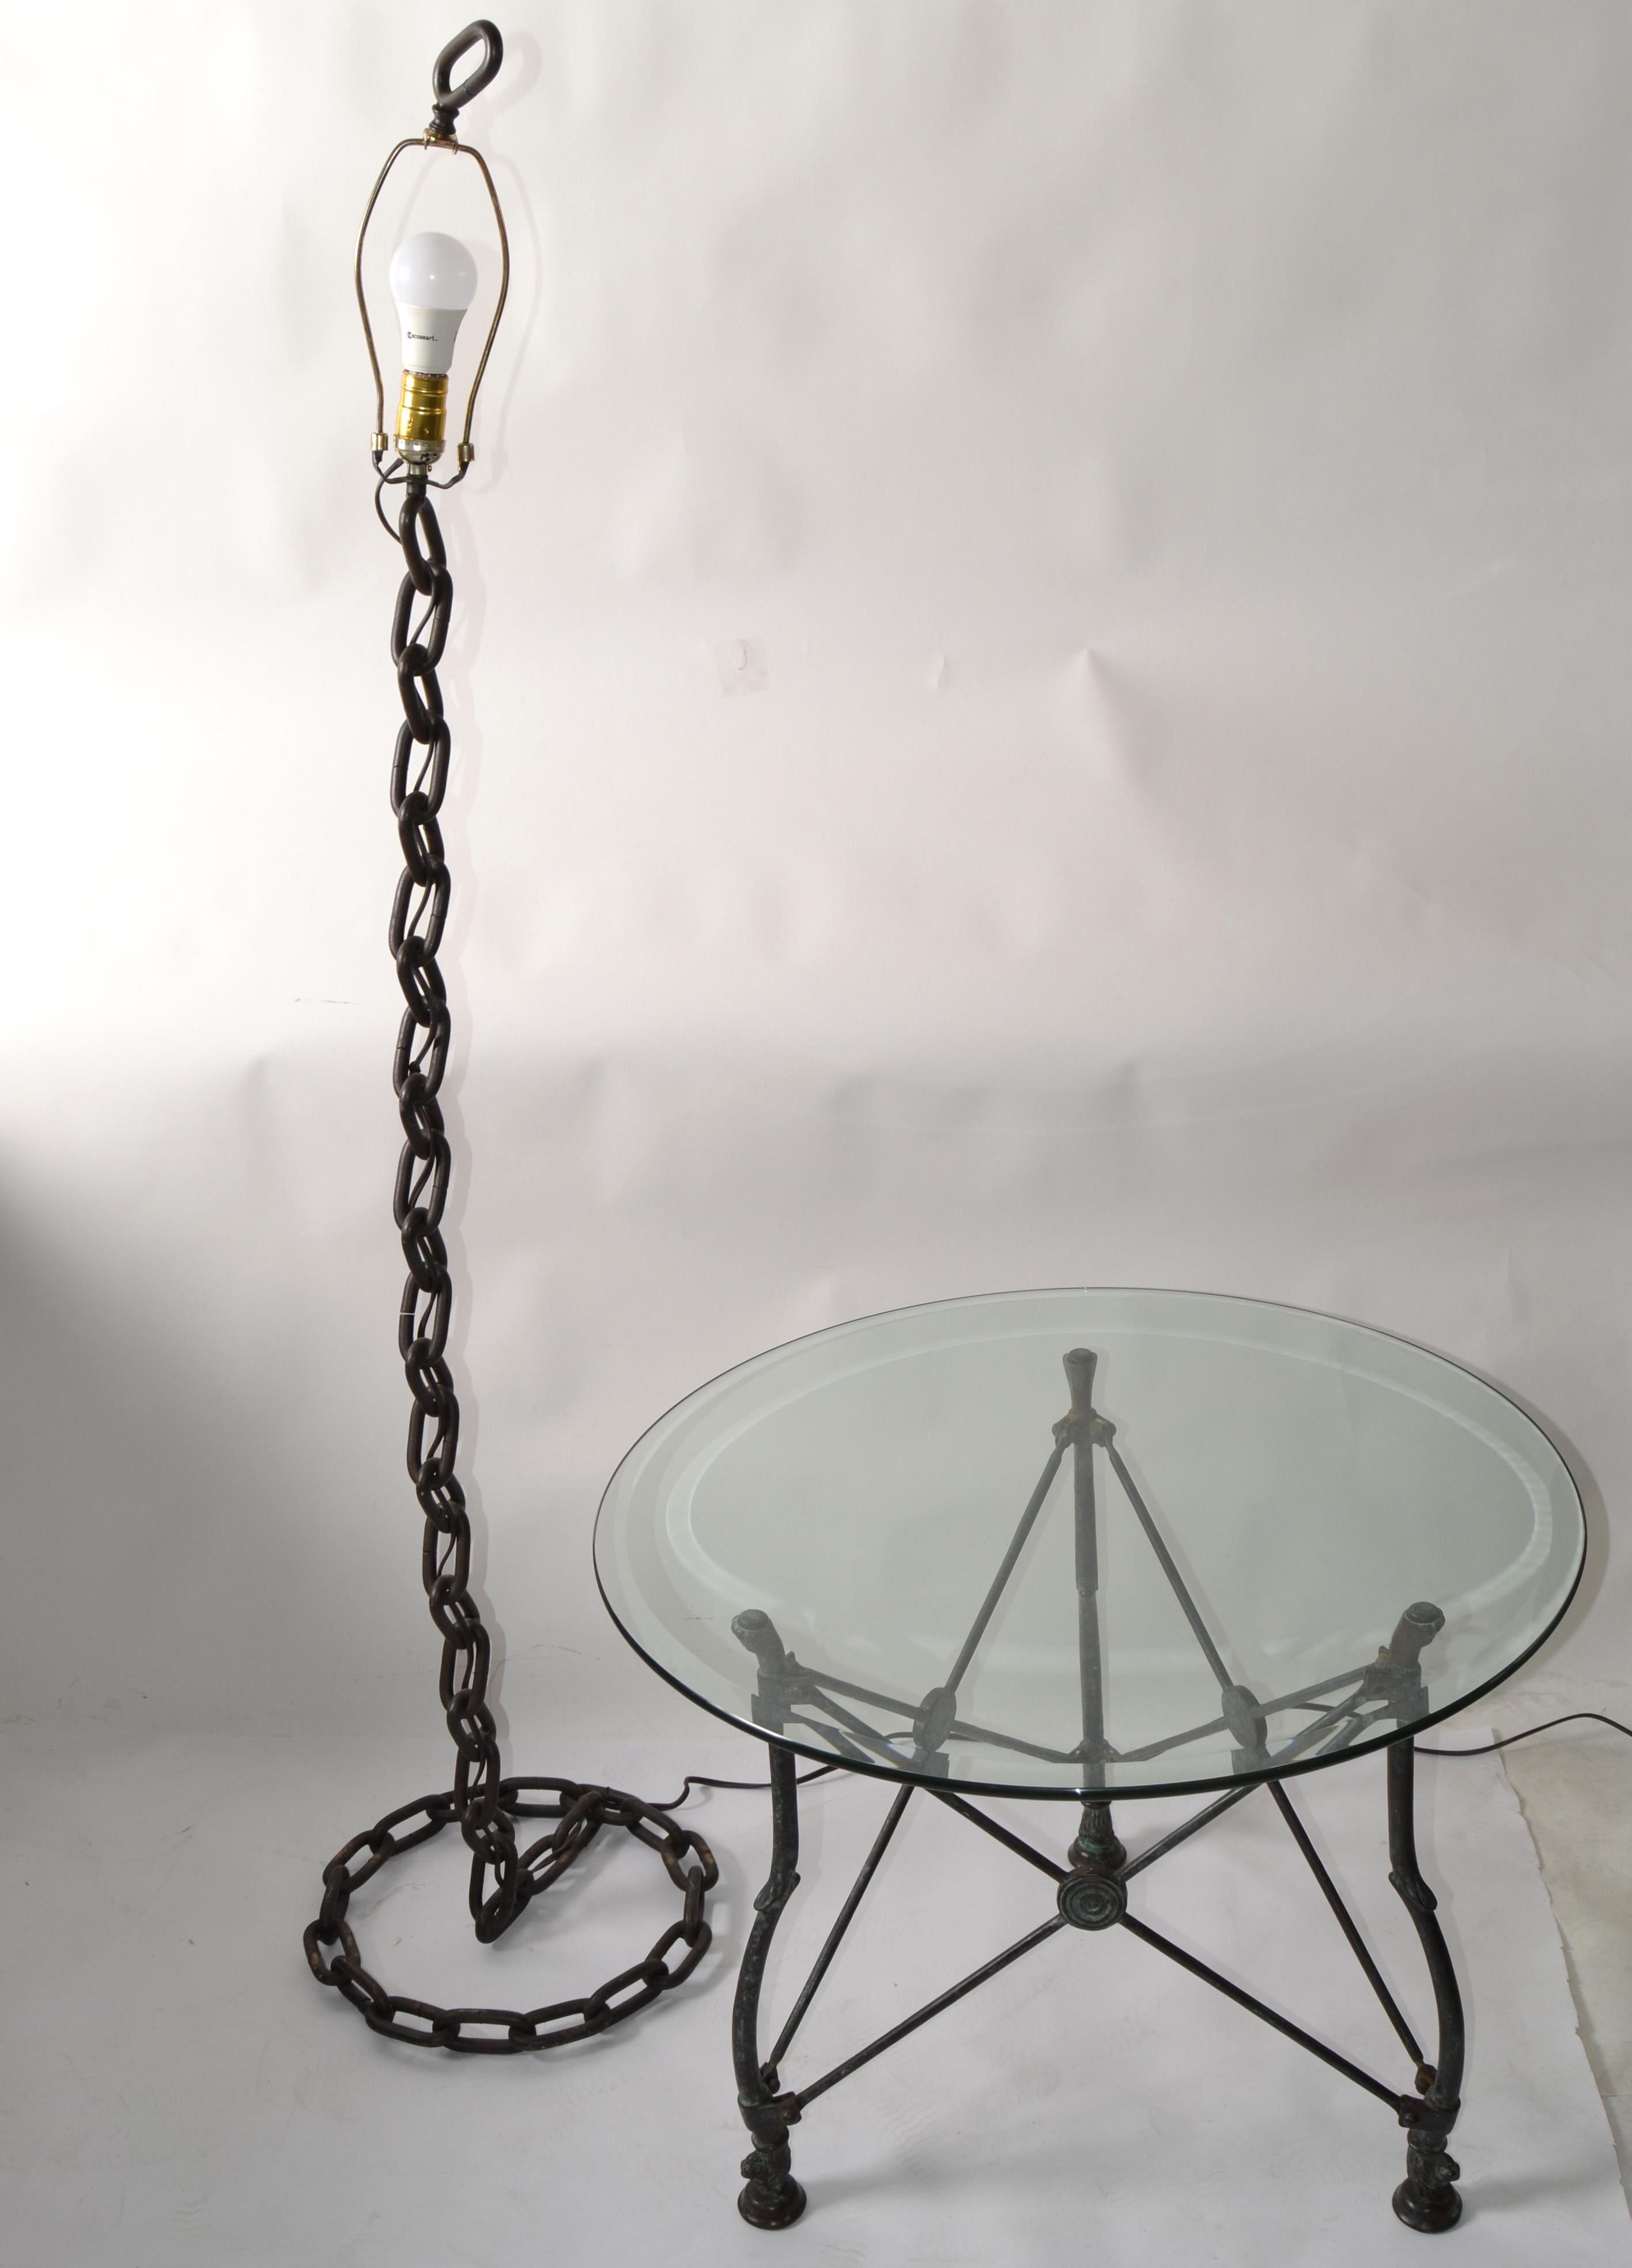 1970s French Brutalist Rustic Vintage Iron Chain Link Floor Lamp Round Base West 7